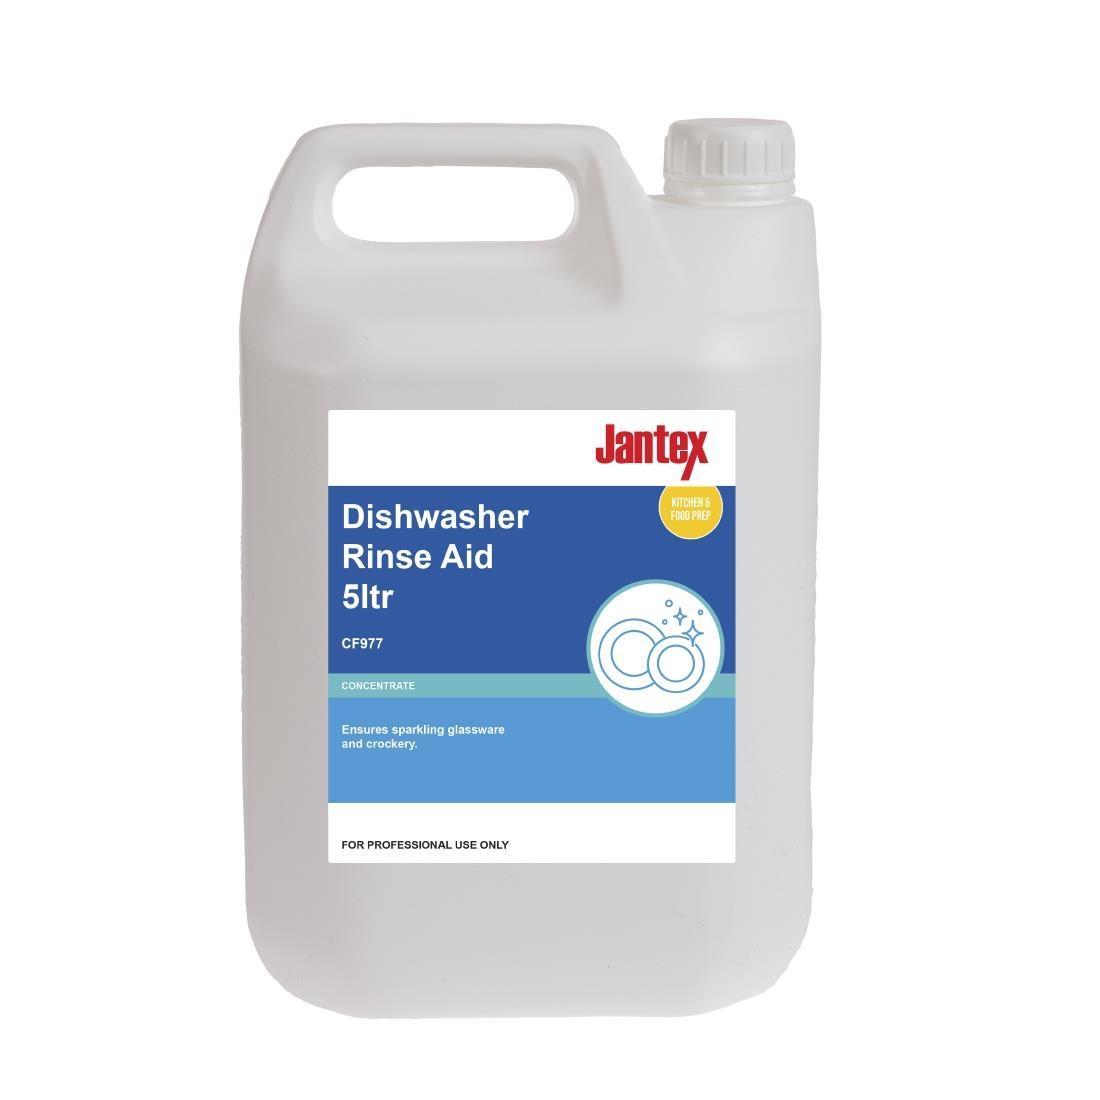 Jantex Dishwasher Rinse Aid Concentrate 5Ltr - CF977  - 1